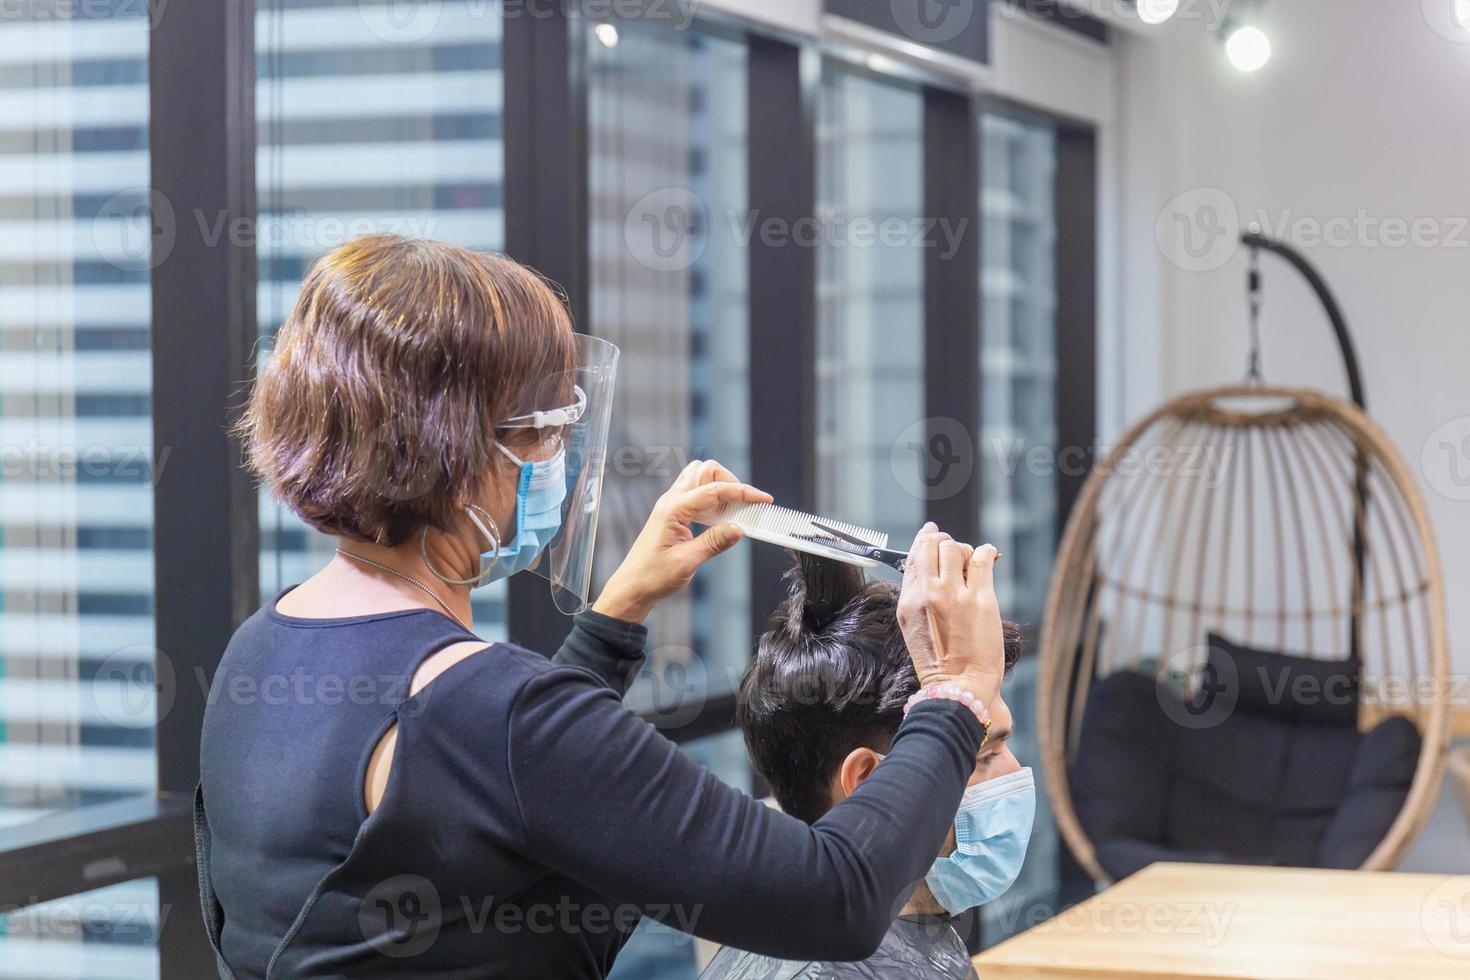 Female hairdresser cutting client's hair with scissors and comb, hairdresser and client wearing protective mask due to coronavirus pandemic, New normal concepts photo